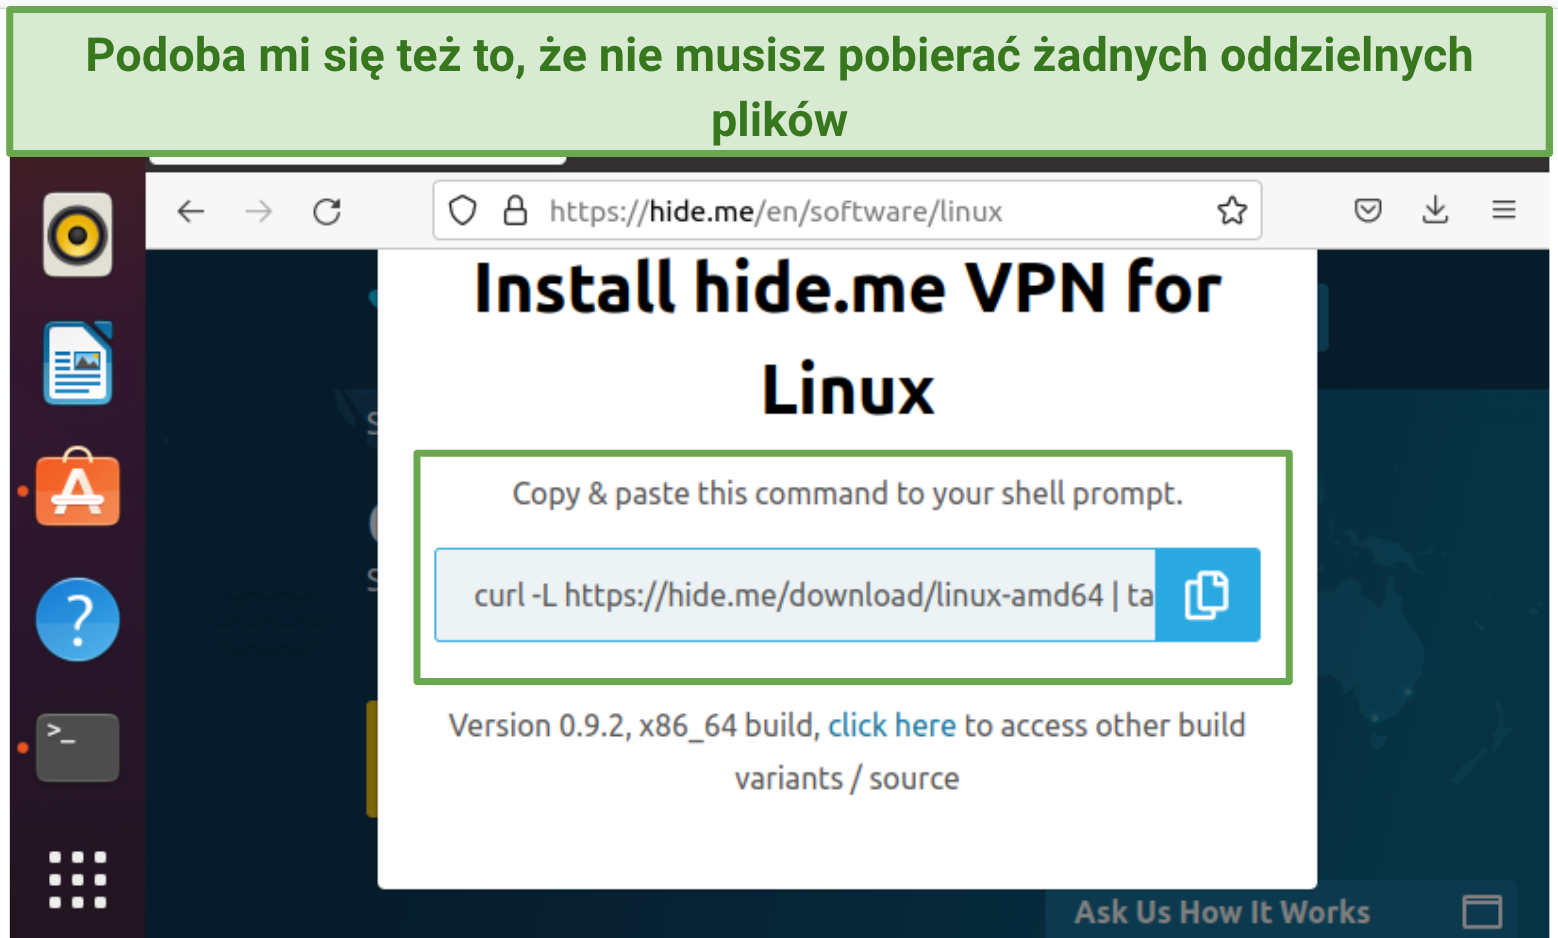 Screenshot of hideme's installation guide for Linux